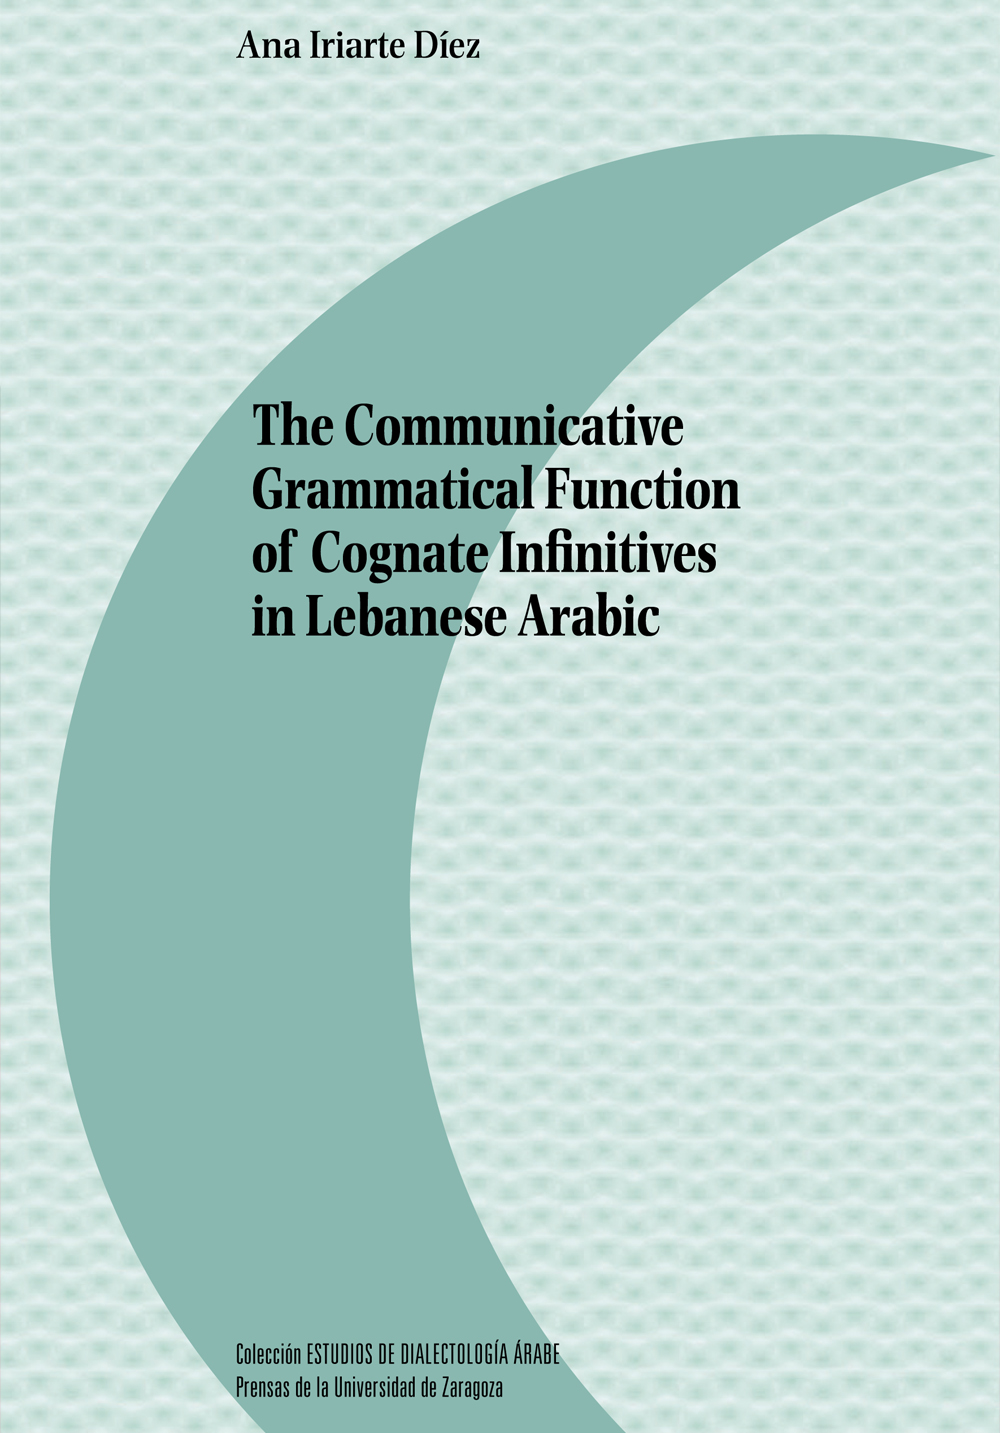 The communicative grammatical function of cognate infinitives in lebanese arabic. 9788413404134